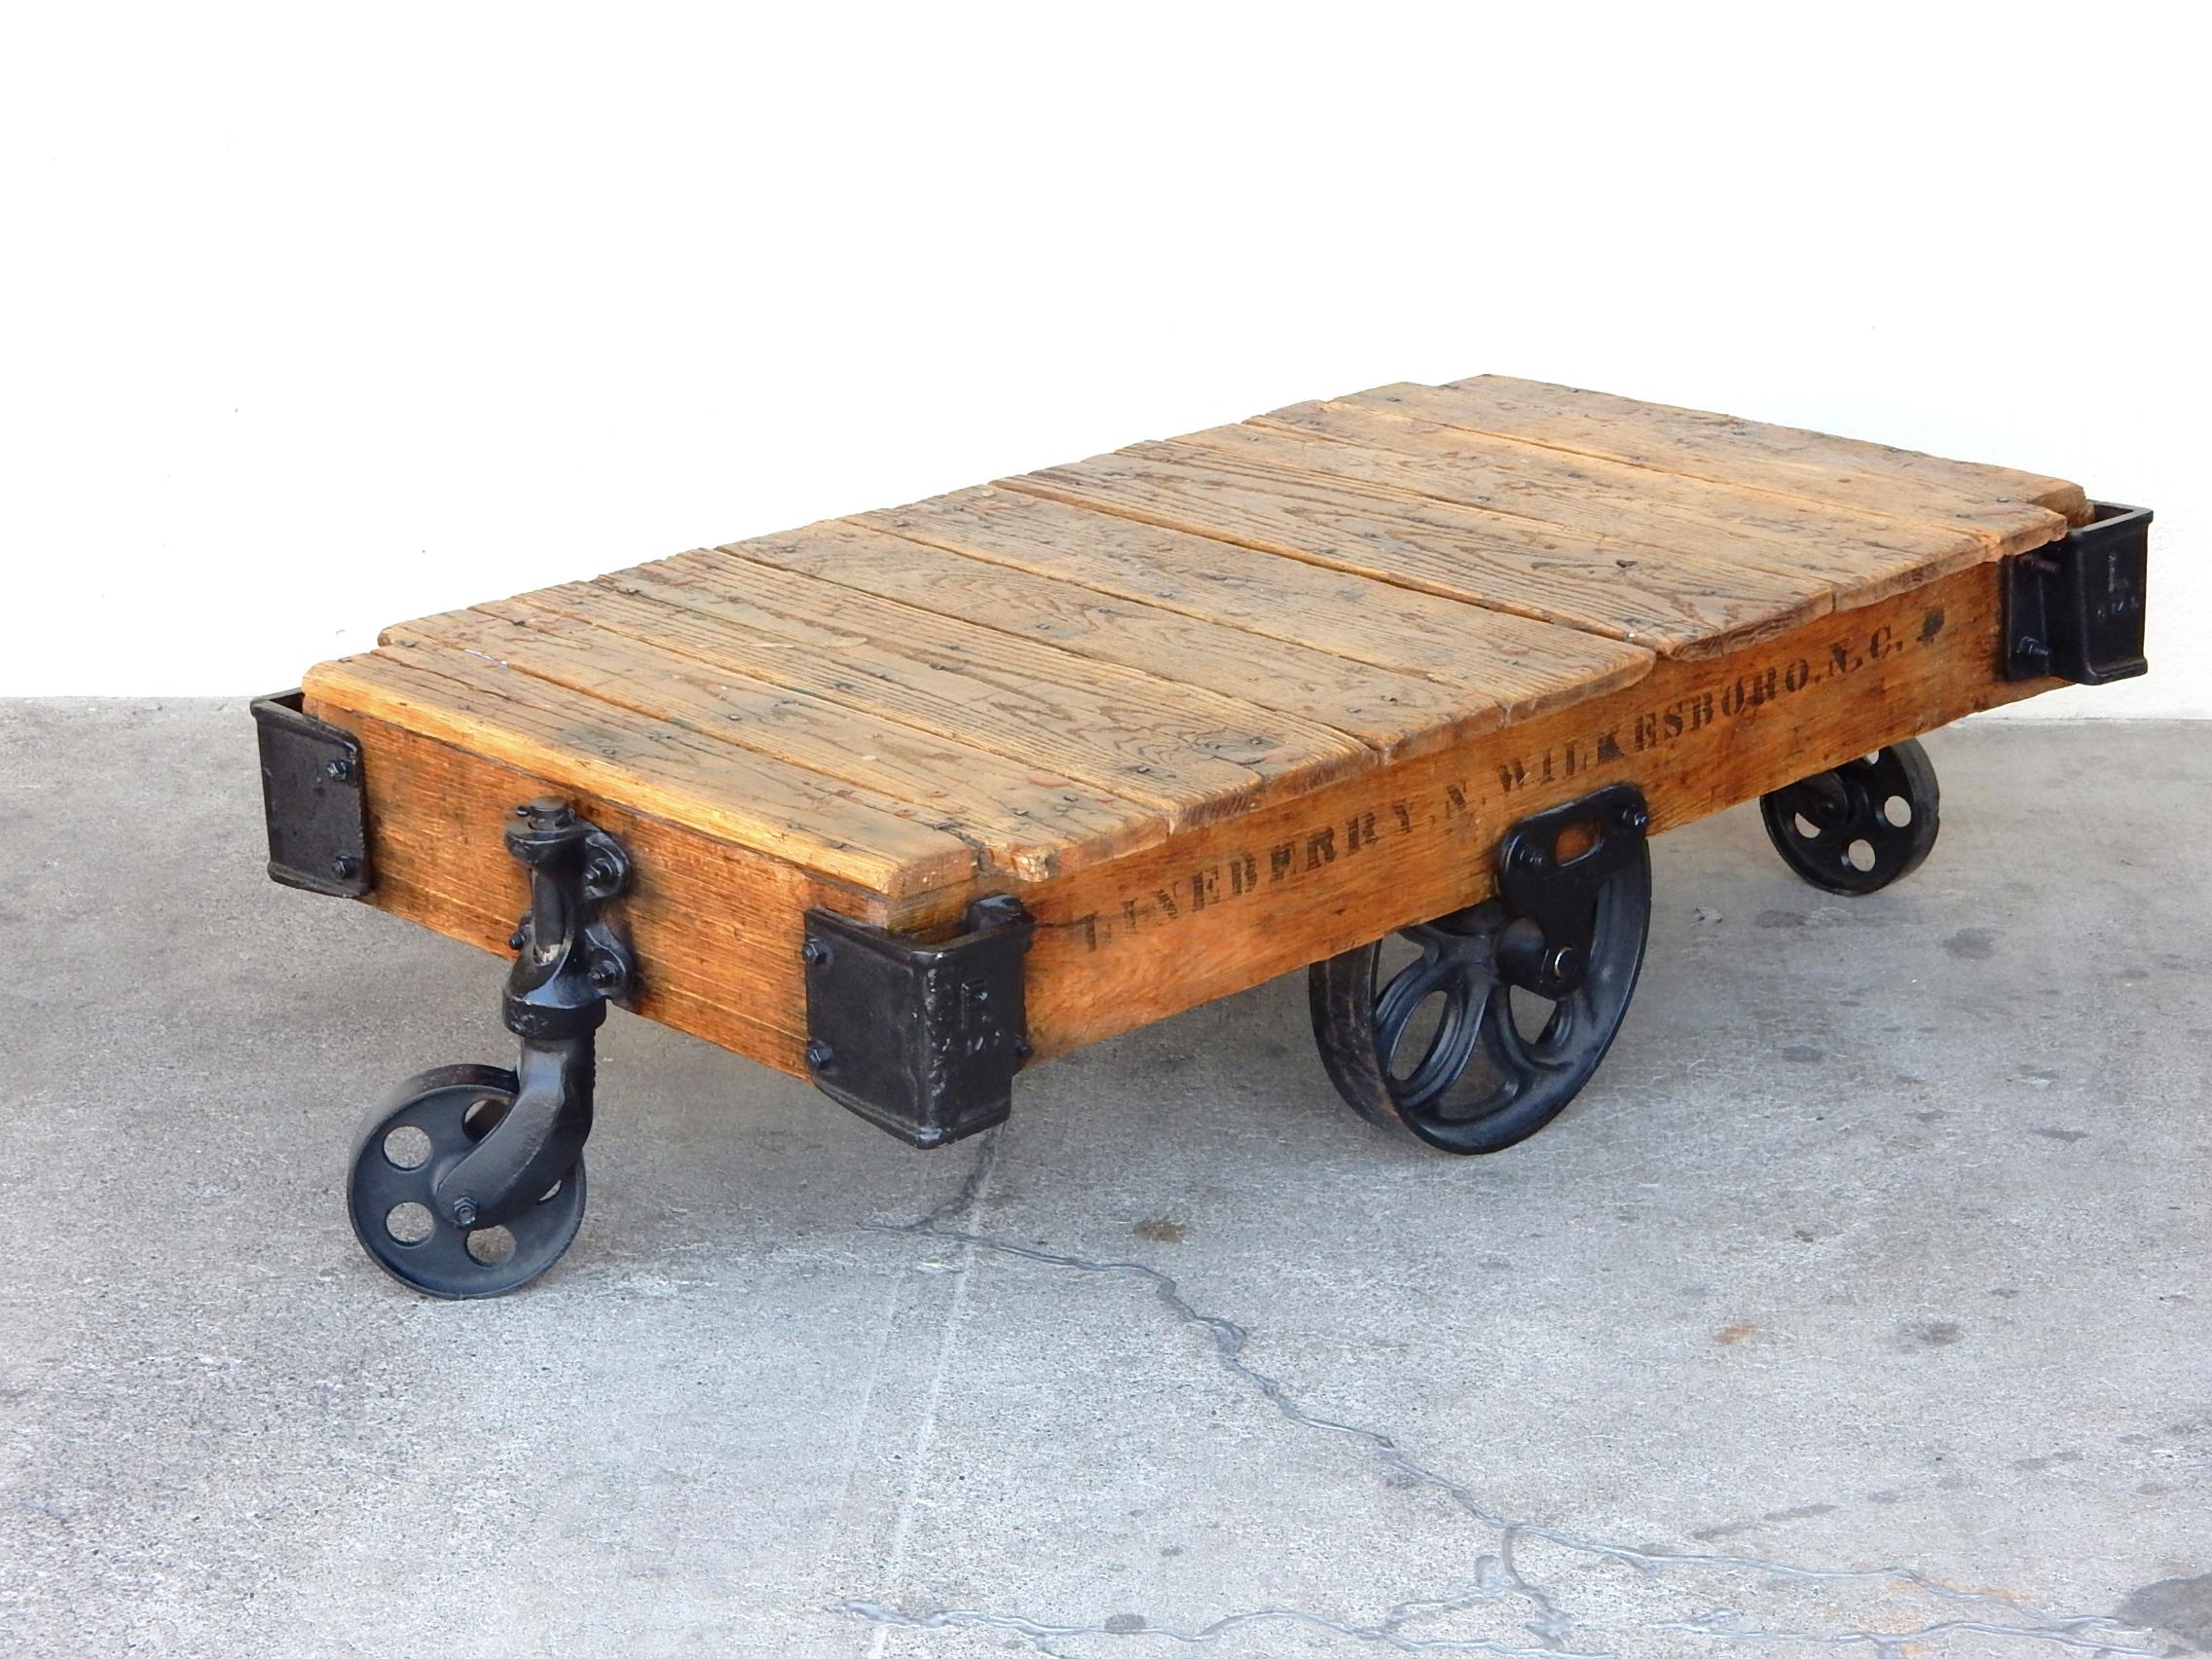 1900s Industrial oak and iron trolley cart refurbished to be a home coffee table.
Large central wheels with front and rear pivoting wheels. Sits at a slight angle. 
Stencil graphics on each side.
Solid heavy piece made of nailed oak planks on an